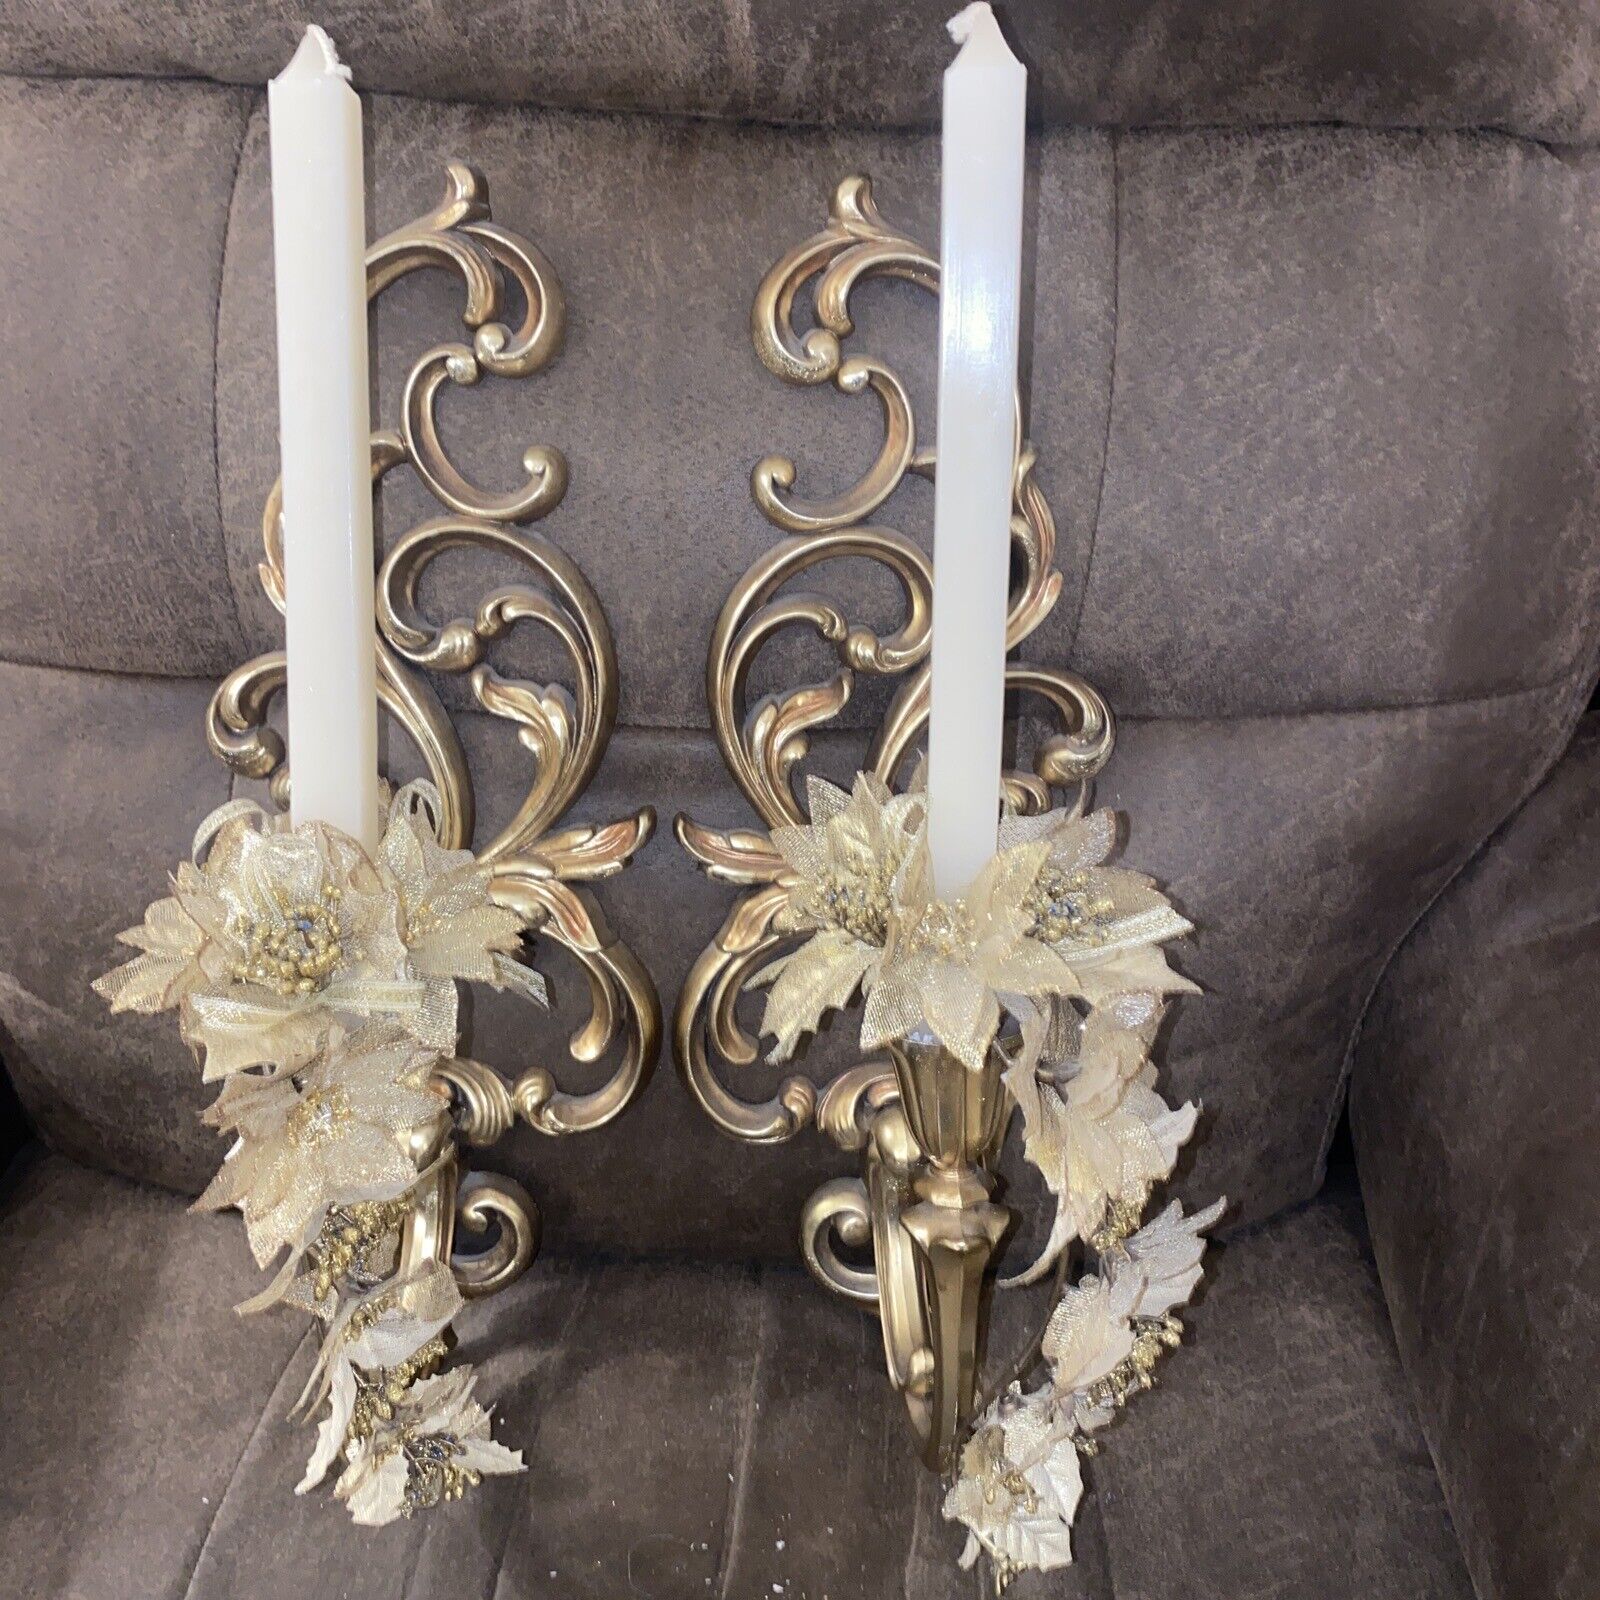 Pair VTG Homco Syroco Gold Floral Wall Candle Sconces 4531 MCM Hollywood Regency